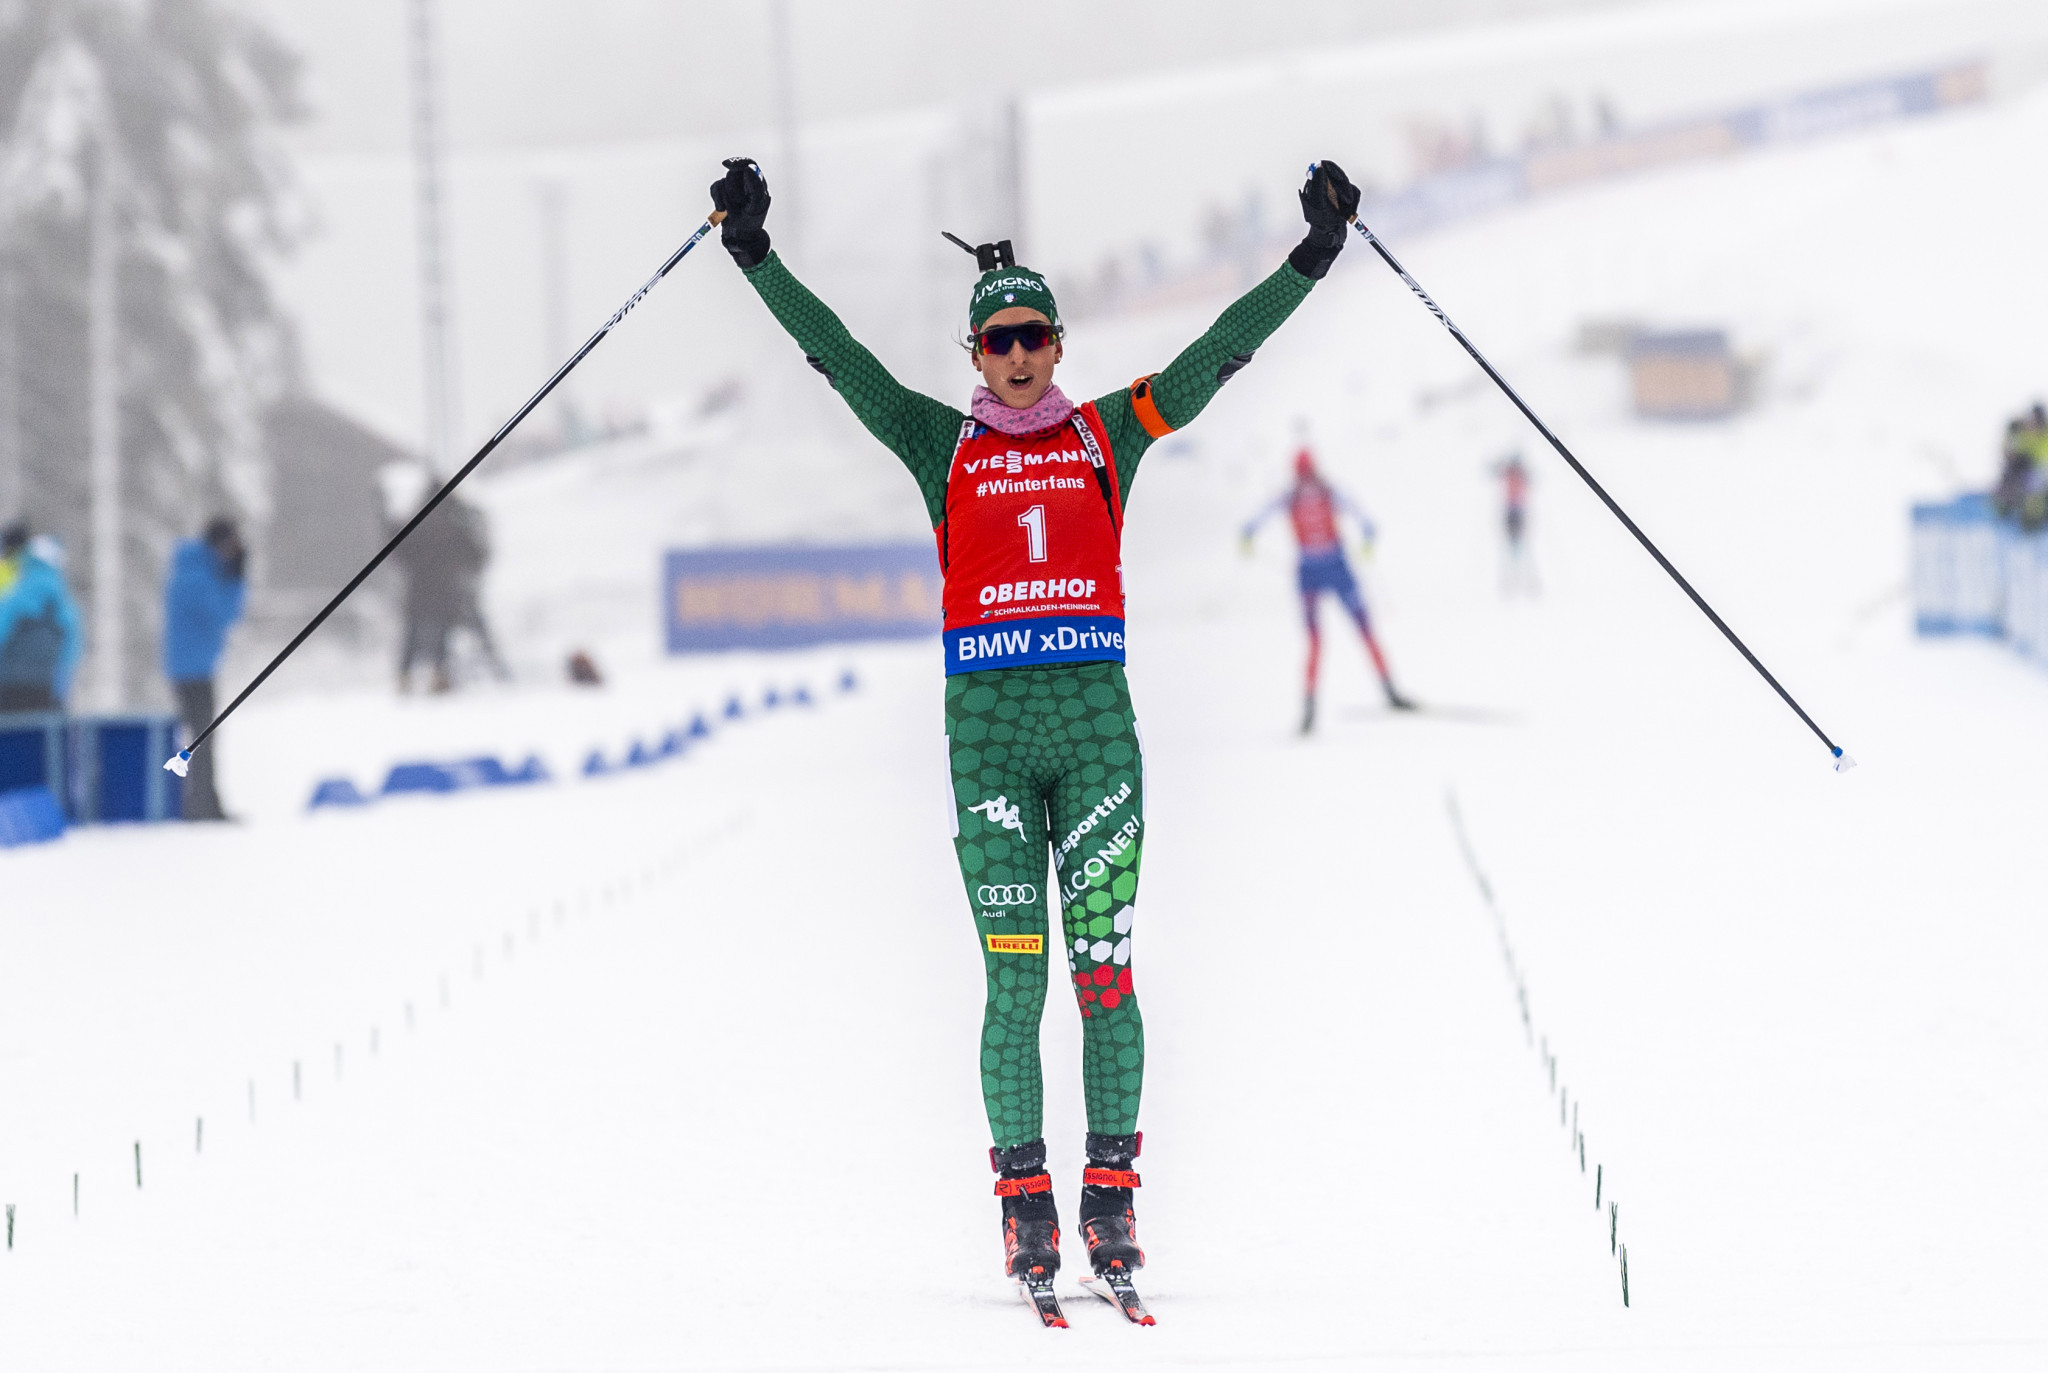 italy's Lisa Vittozzi won the women's pursuit at the IBU World Cup in Oberhof today to claim her second win in three days ©Getty Images